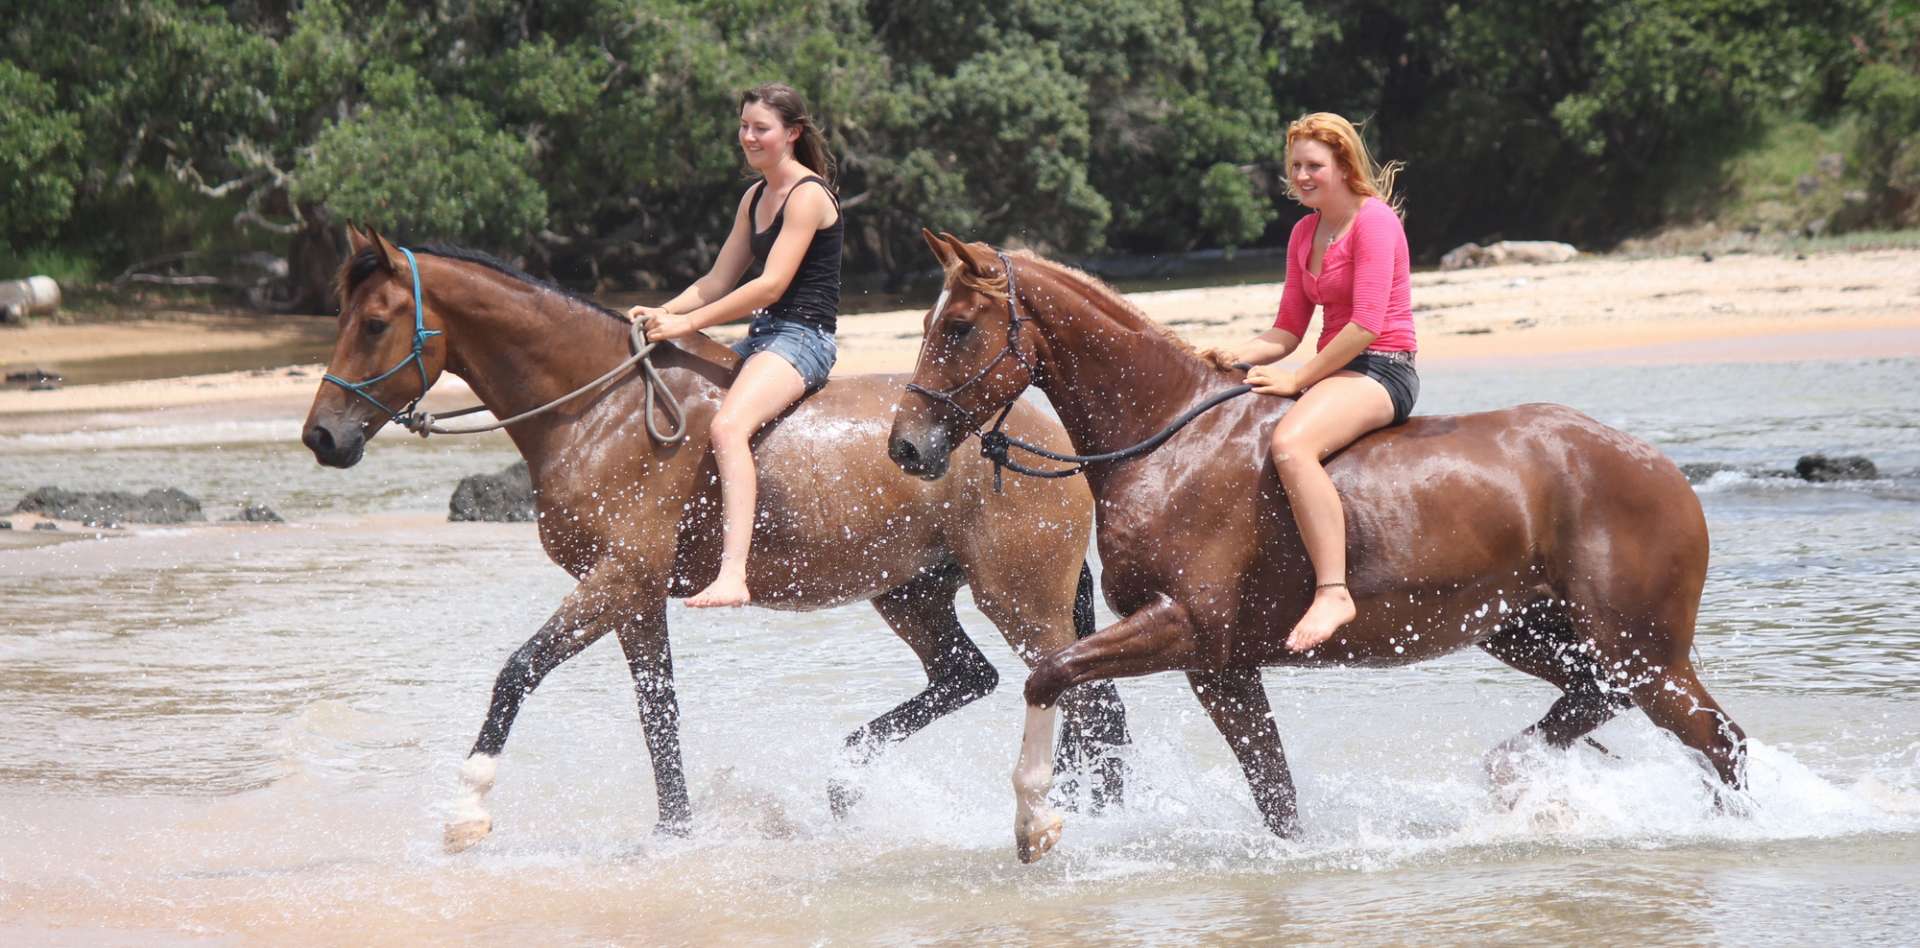 Beach Horse Riding and Trekking Activities at the Beach Bay of Islands New Zealand